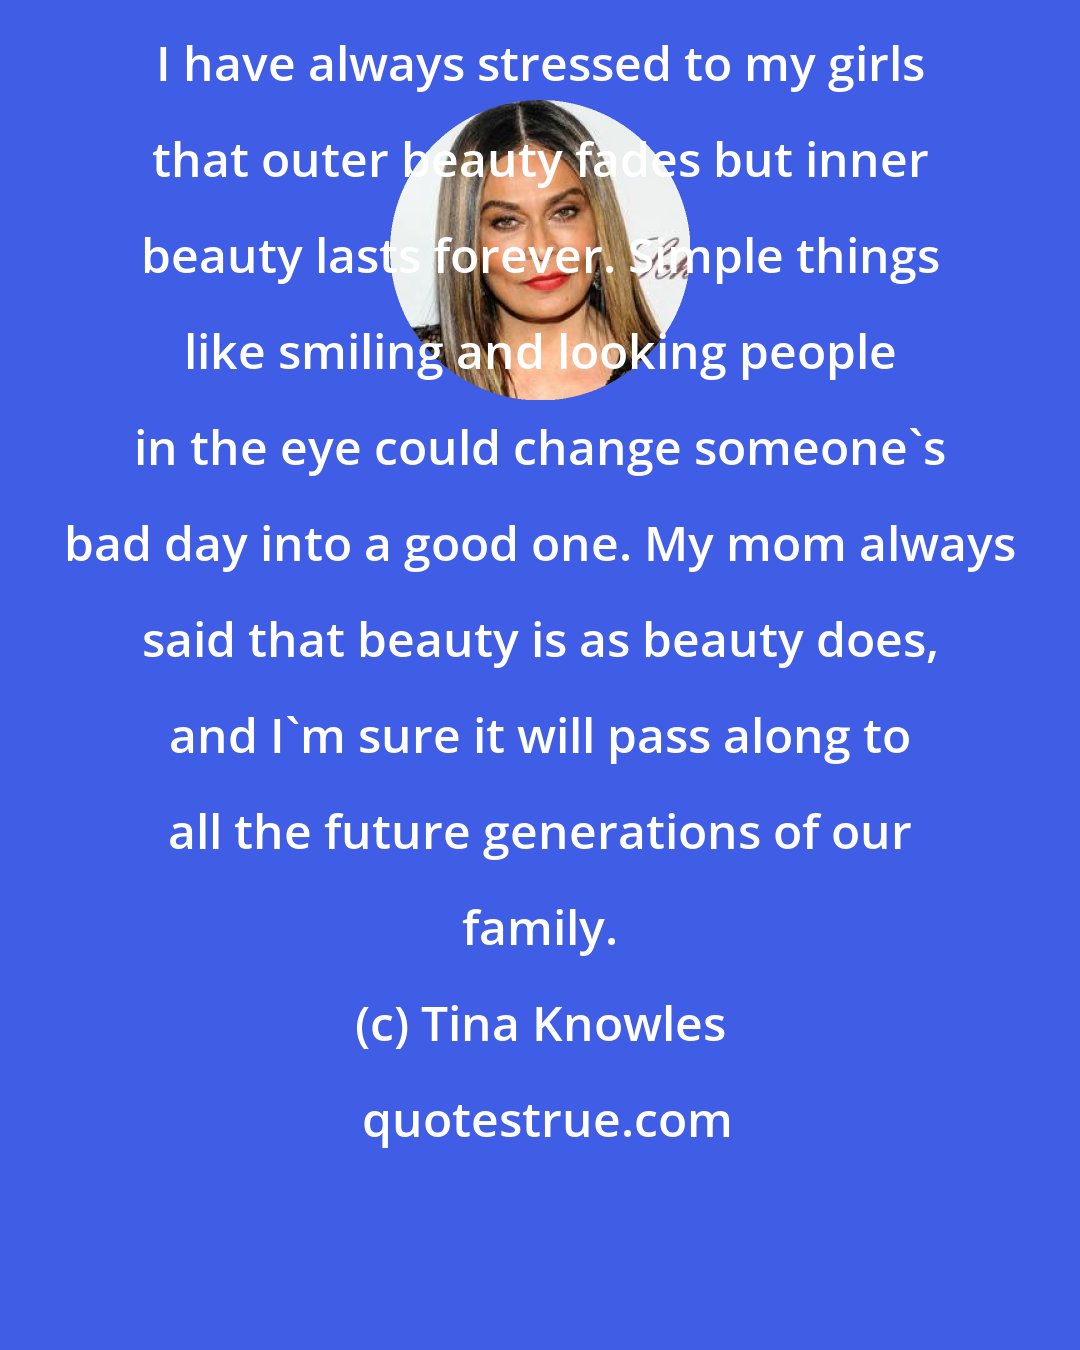 Tina Knowles: I have always stressed to my girls that outer beauty fades but inner beauty lasts forever. Simple things like smiling and looking people in the eye could change someone's bad day into a good one. My mom always said that beauty is as beauty does, and I'm sure it will pass along to all the future generations of our family.